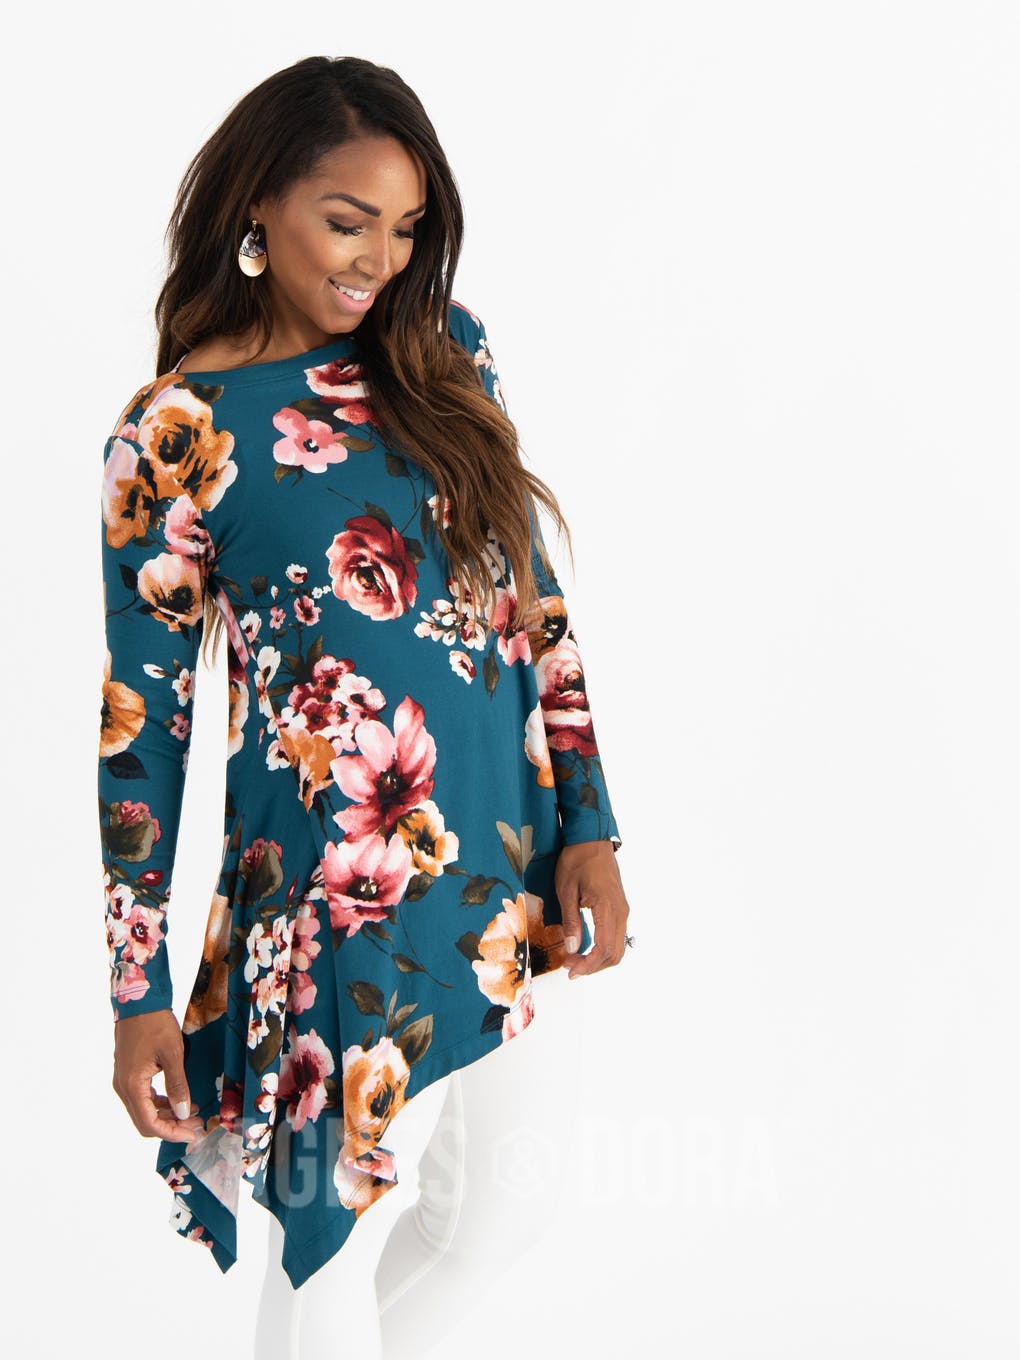 Asymmetrical Tunic Baby Suede Teal Based Floral Long Sleeve